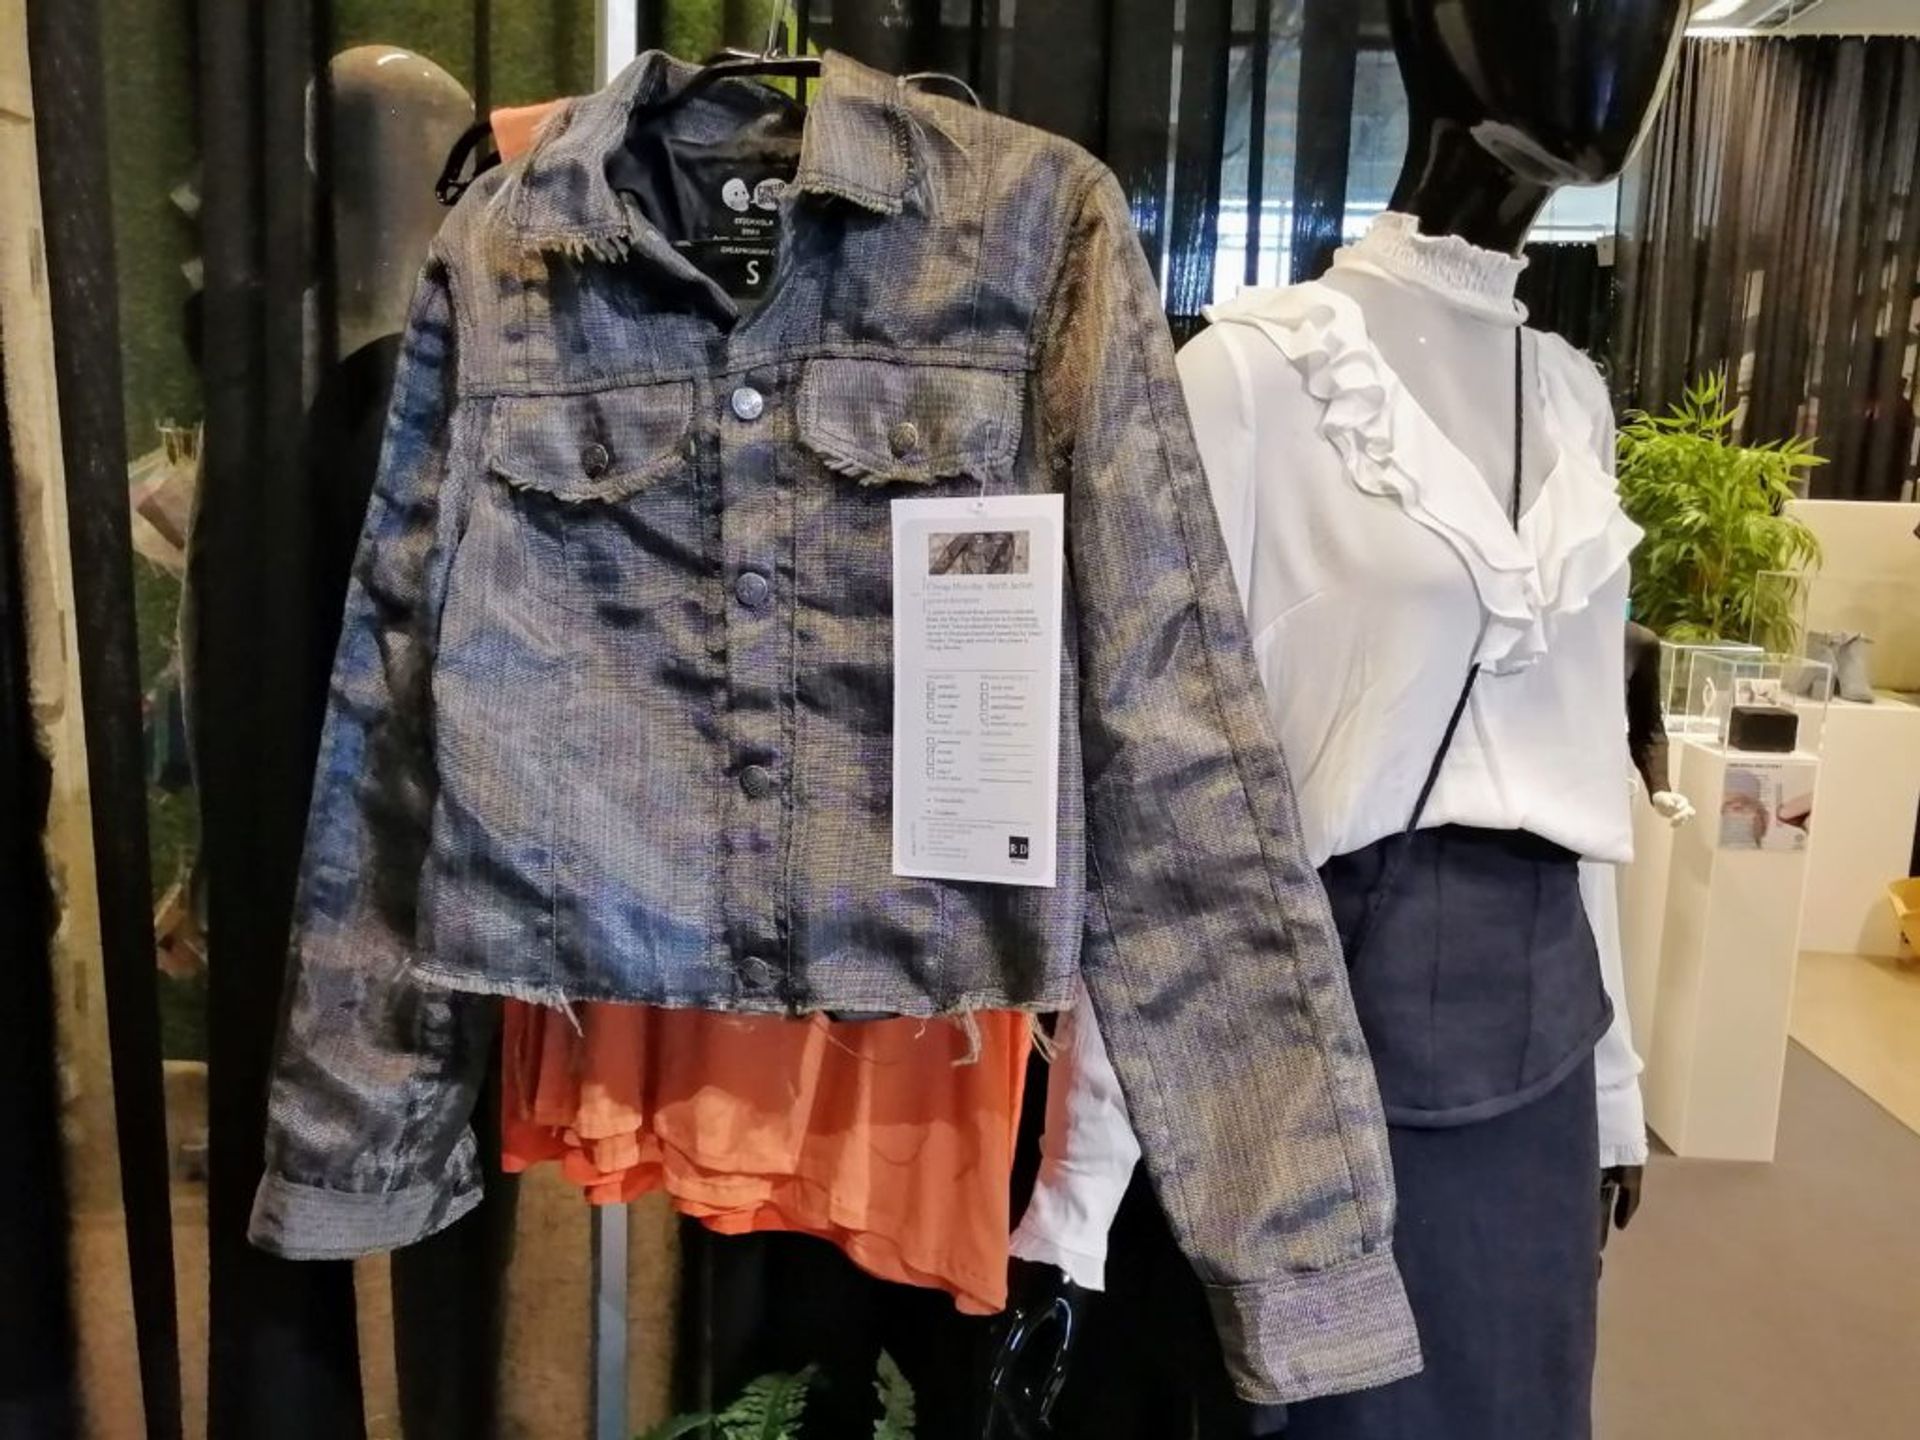 Clothing on mannequins.